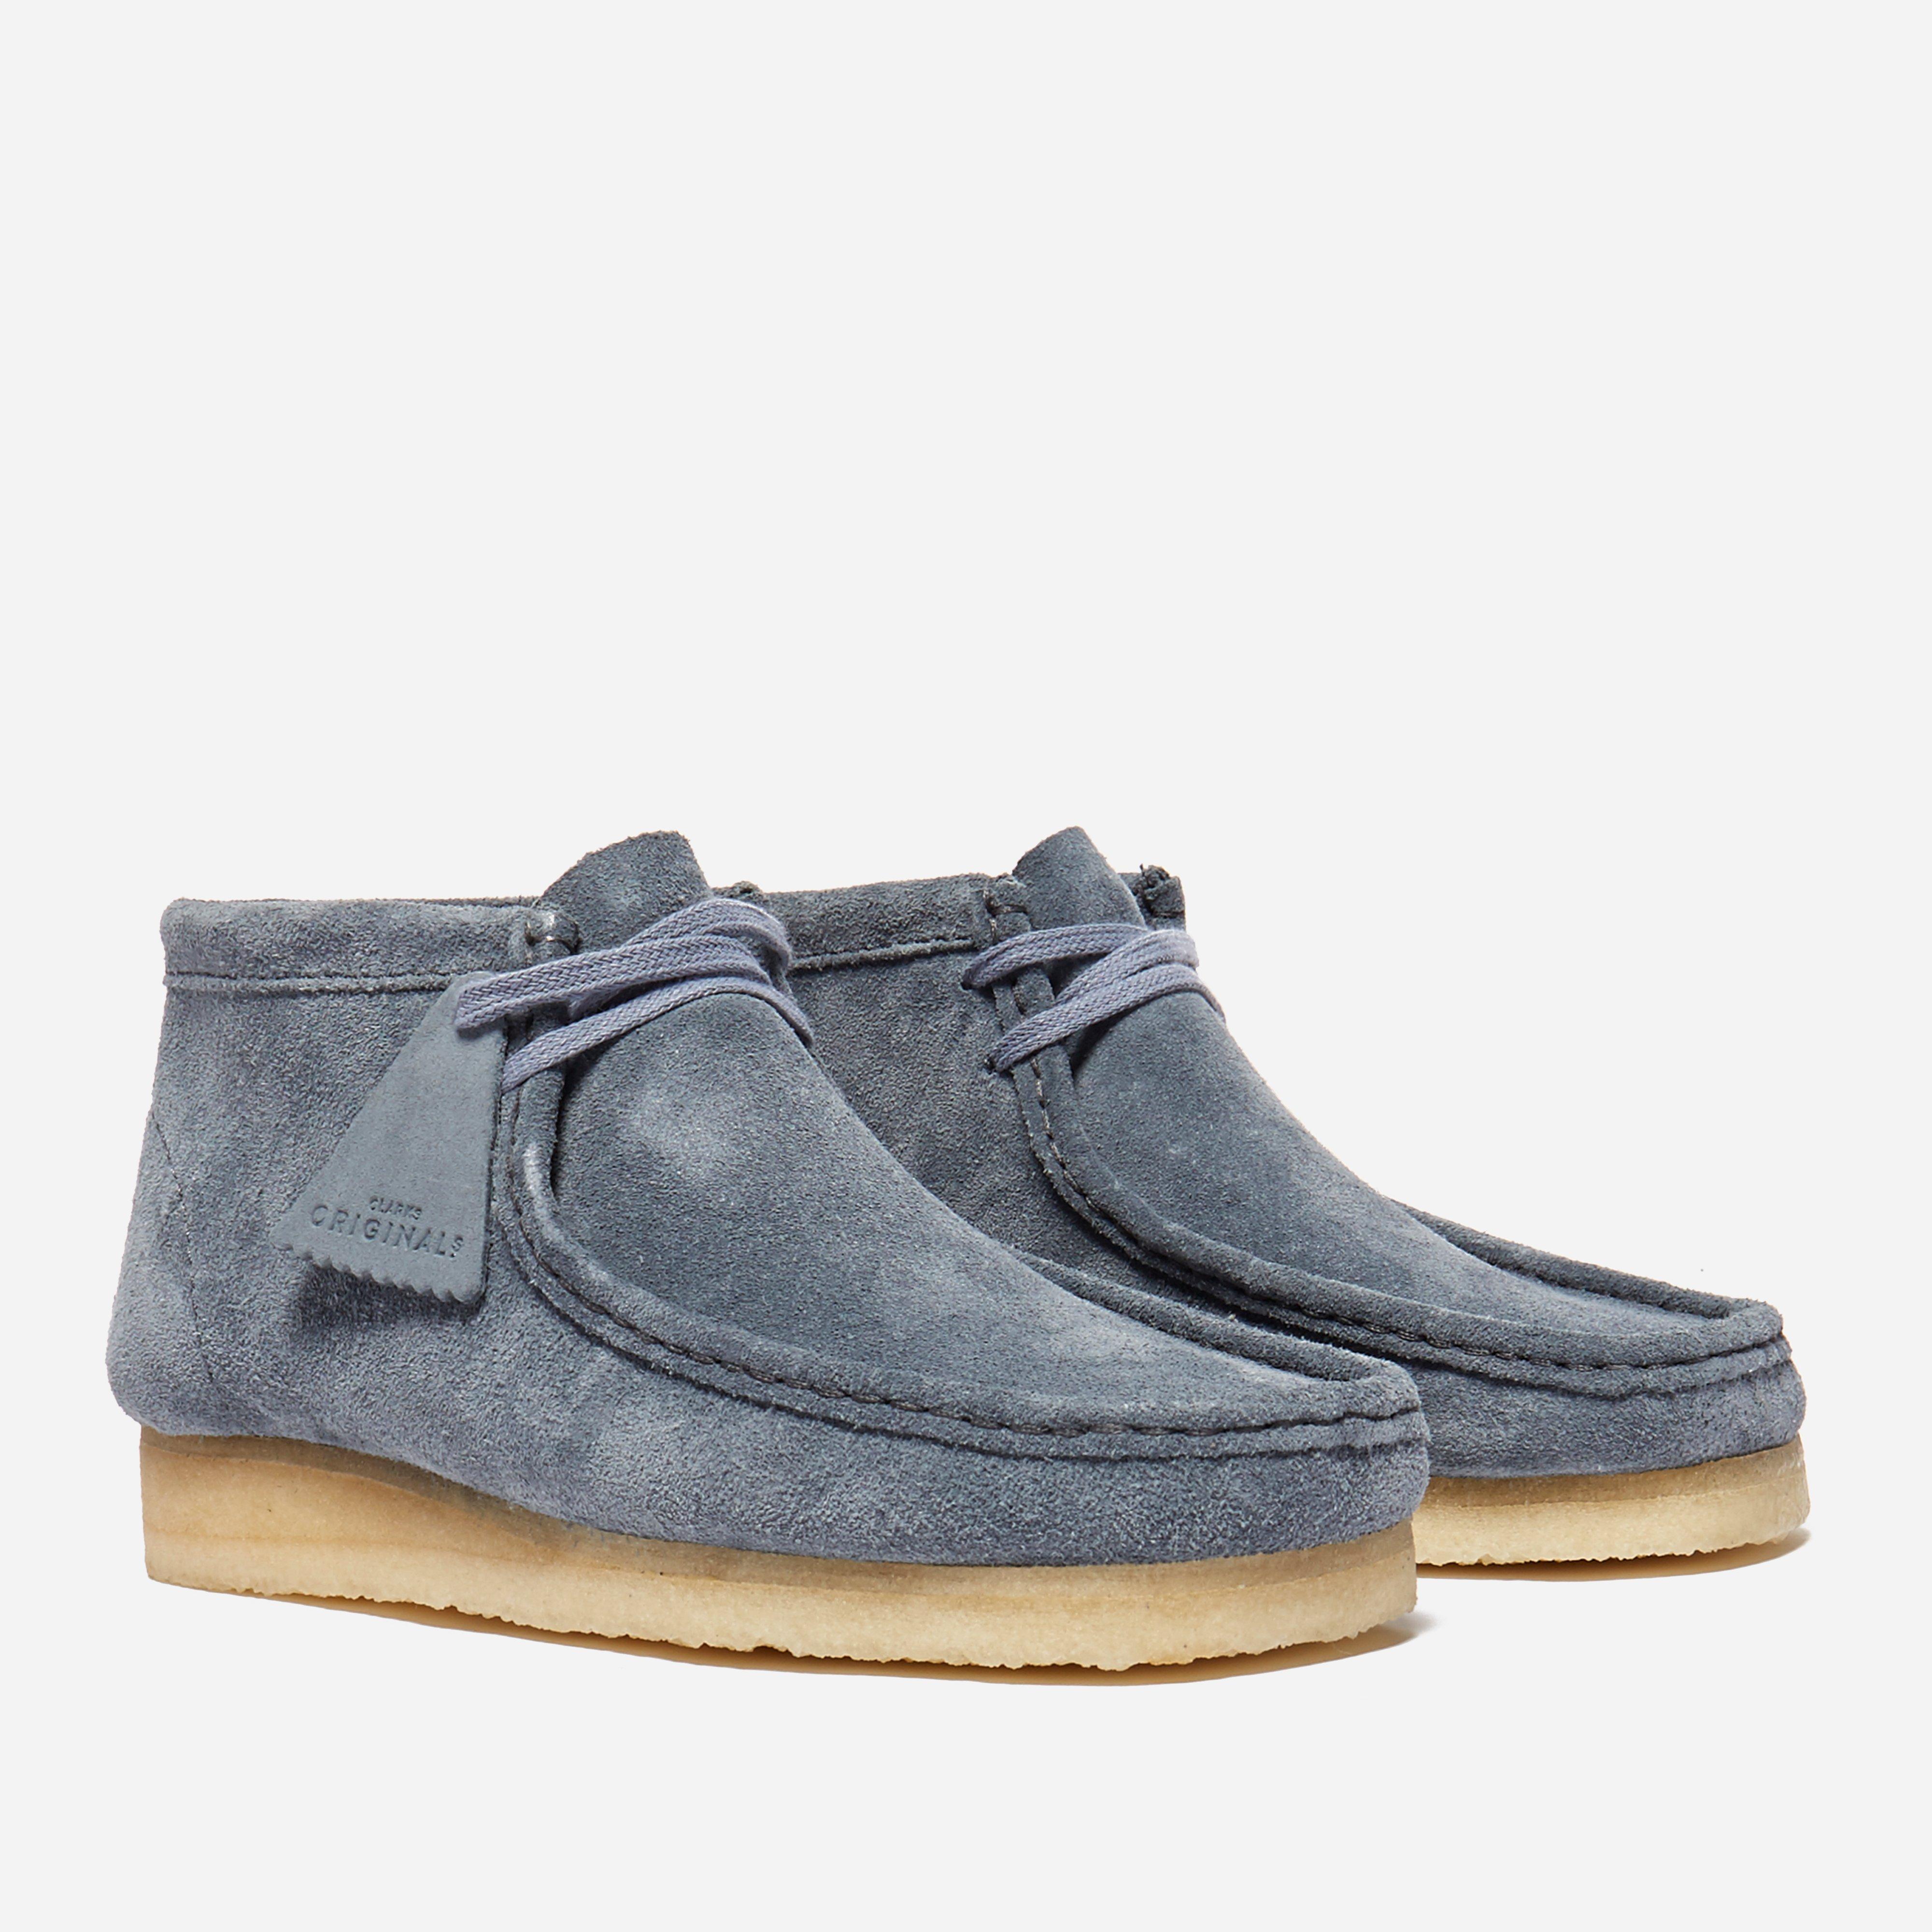 Clarks Suede Wallabee Boot in Blue for Men - Lyst